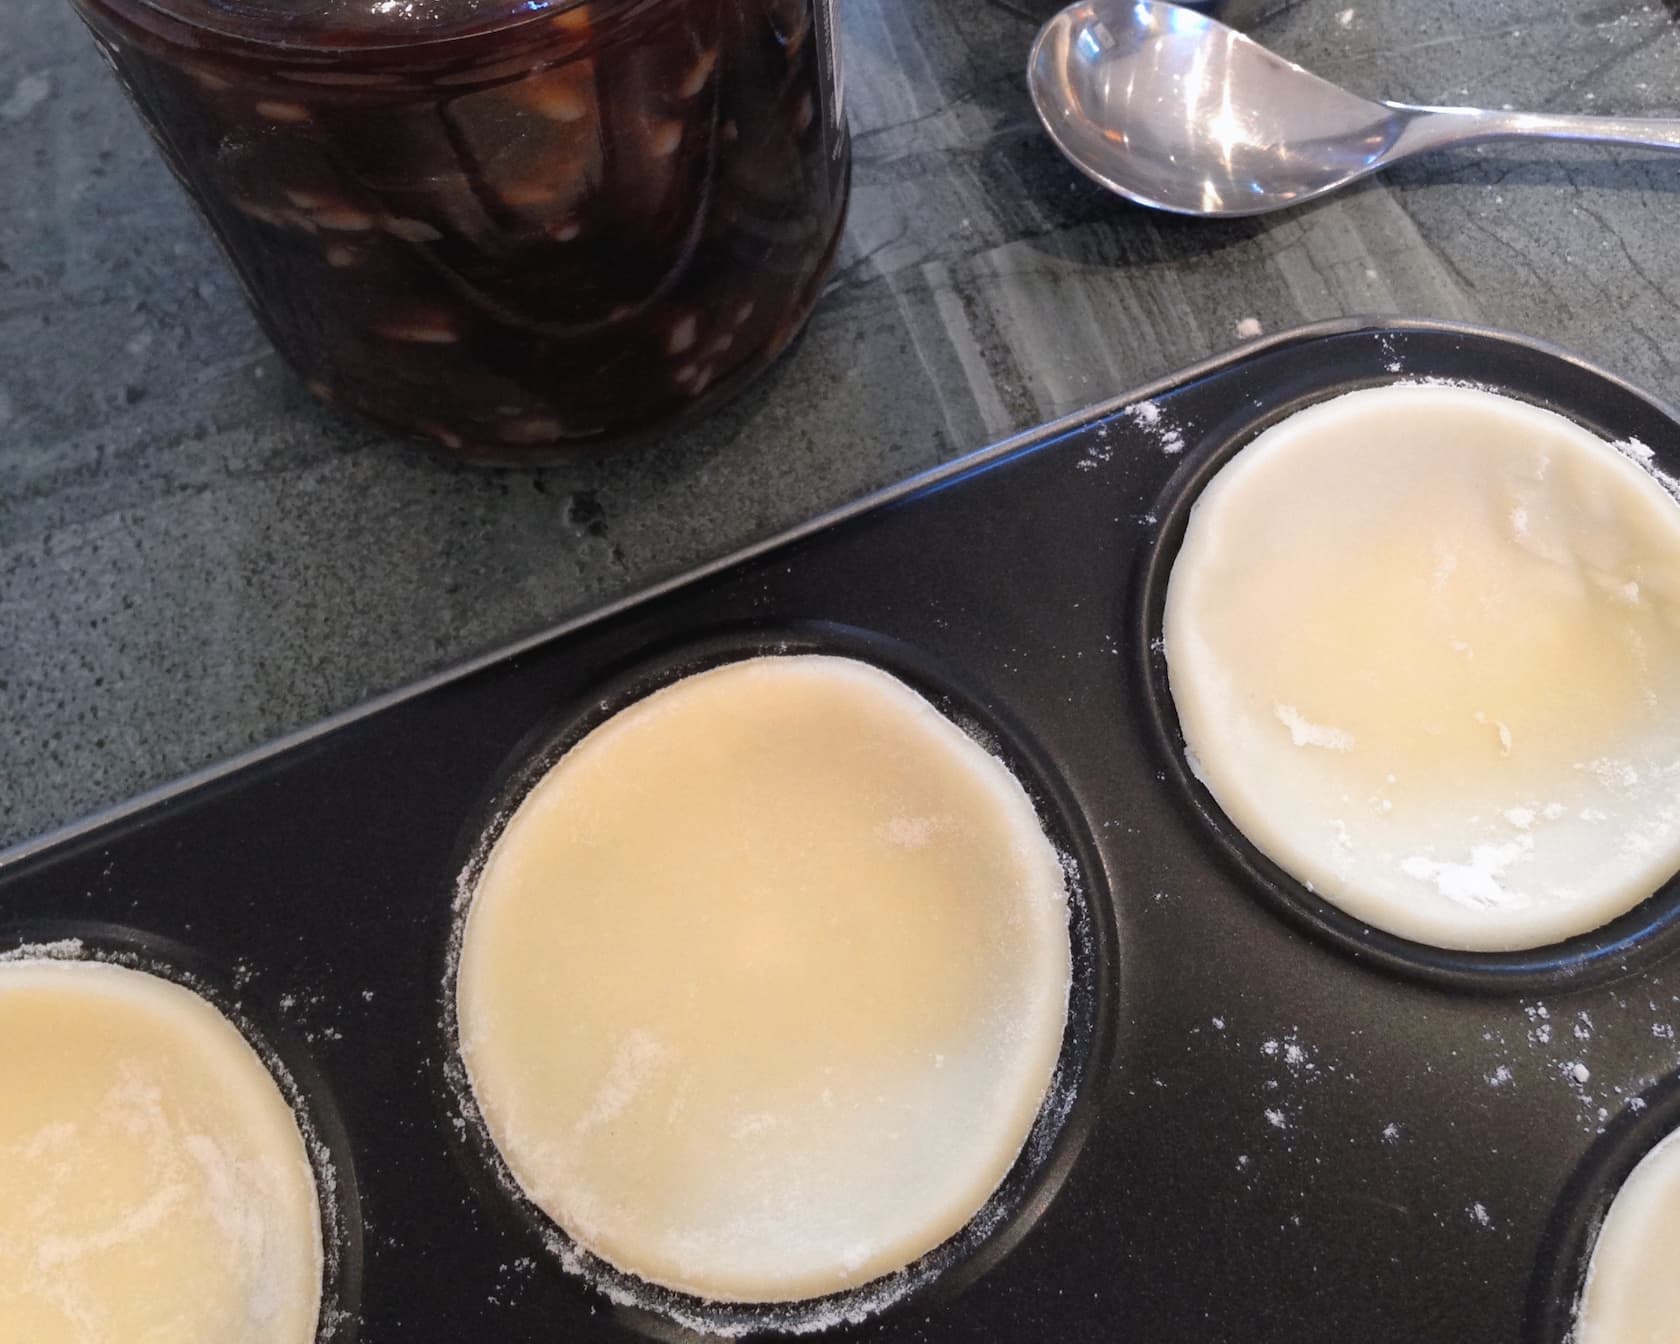 Gently press the mince pie pastry base into the tin